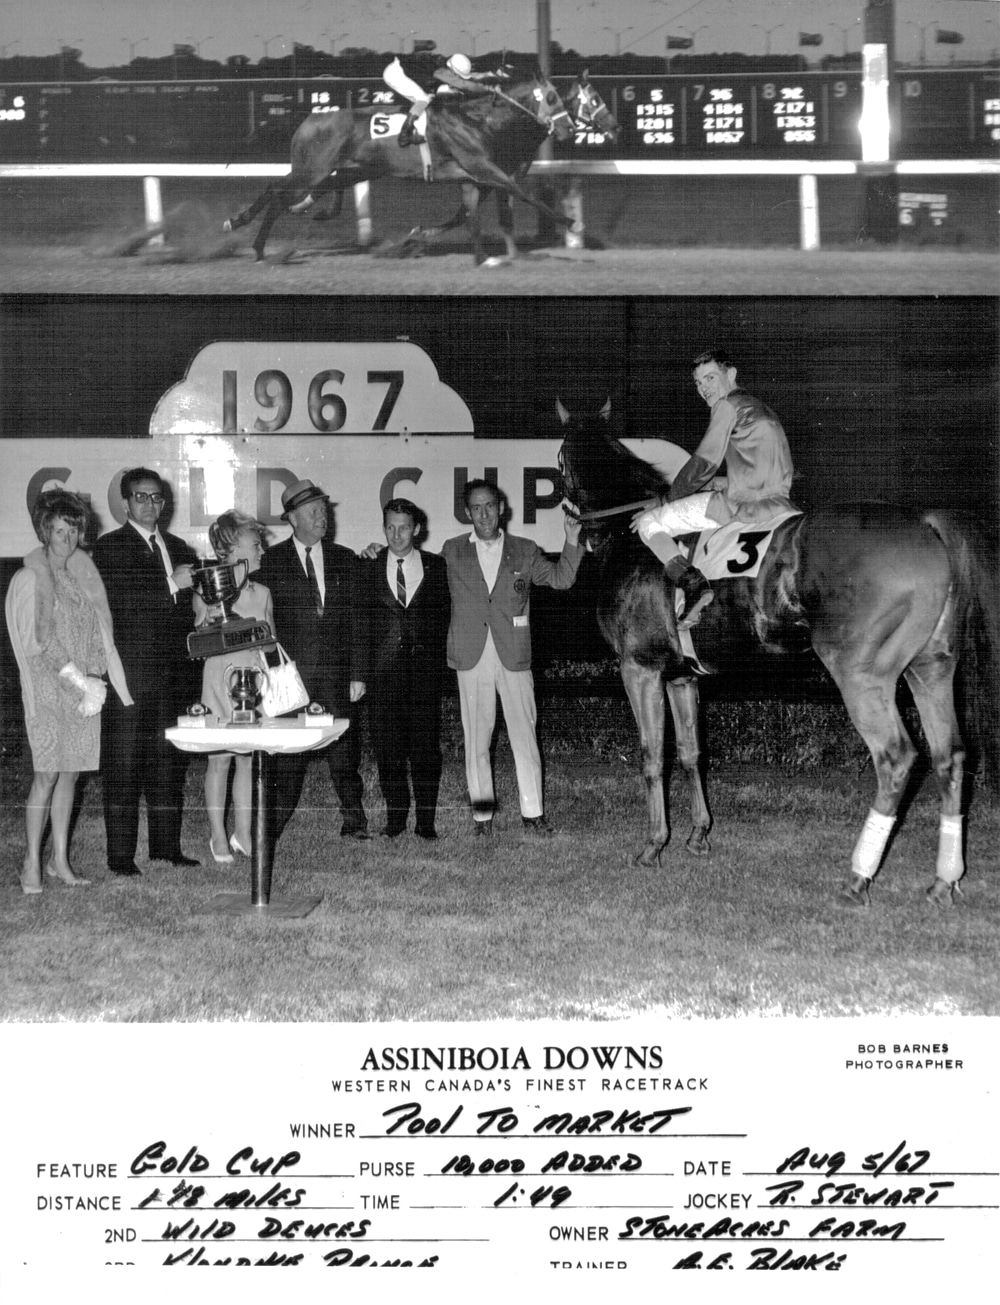 Pool to Market sets new track record in 1967 Gold Cup at Assiniboia Downs